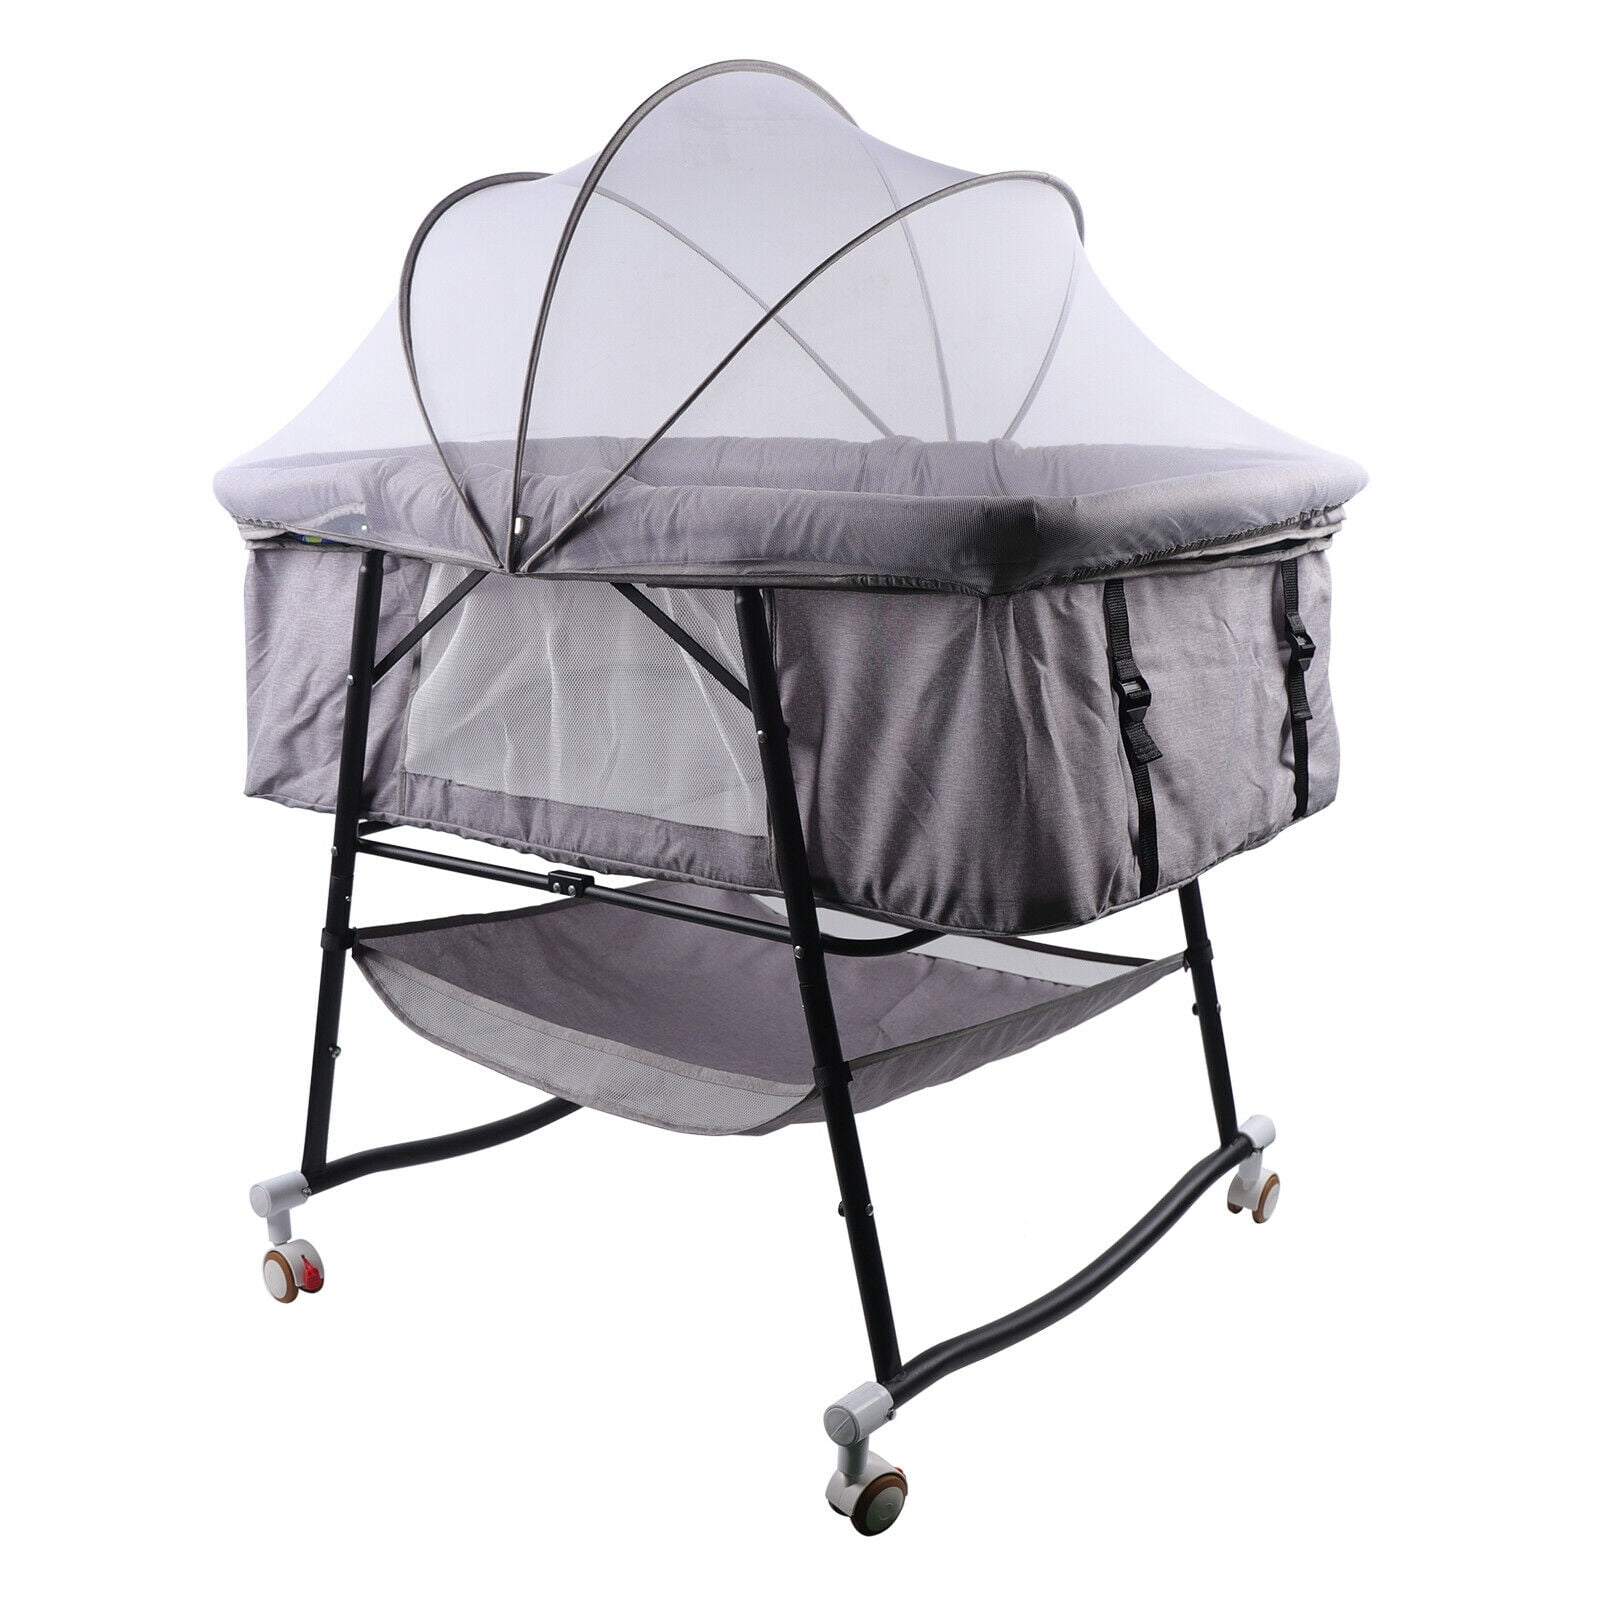 Electric Baby Cradle Swing Bed Bedside Bassinet for Infants Auto Baby Rocking Sleeper Bluetooth Music Mosquito Net U Pillow Toys Rocker Safe 5 Speed Cot Cradle Swing Beds for Infants 0-24 Months Baby 